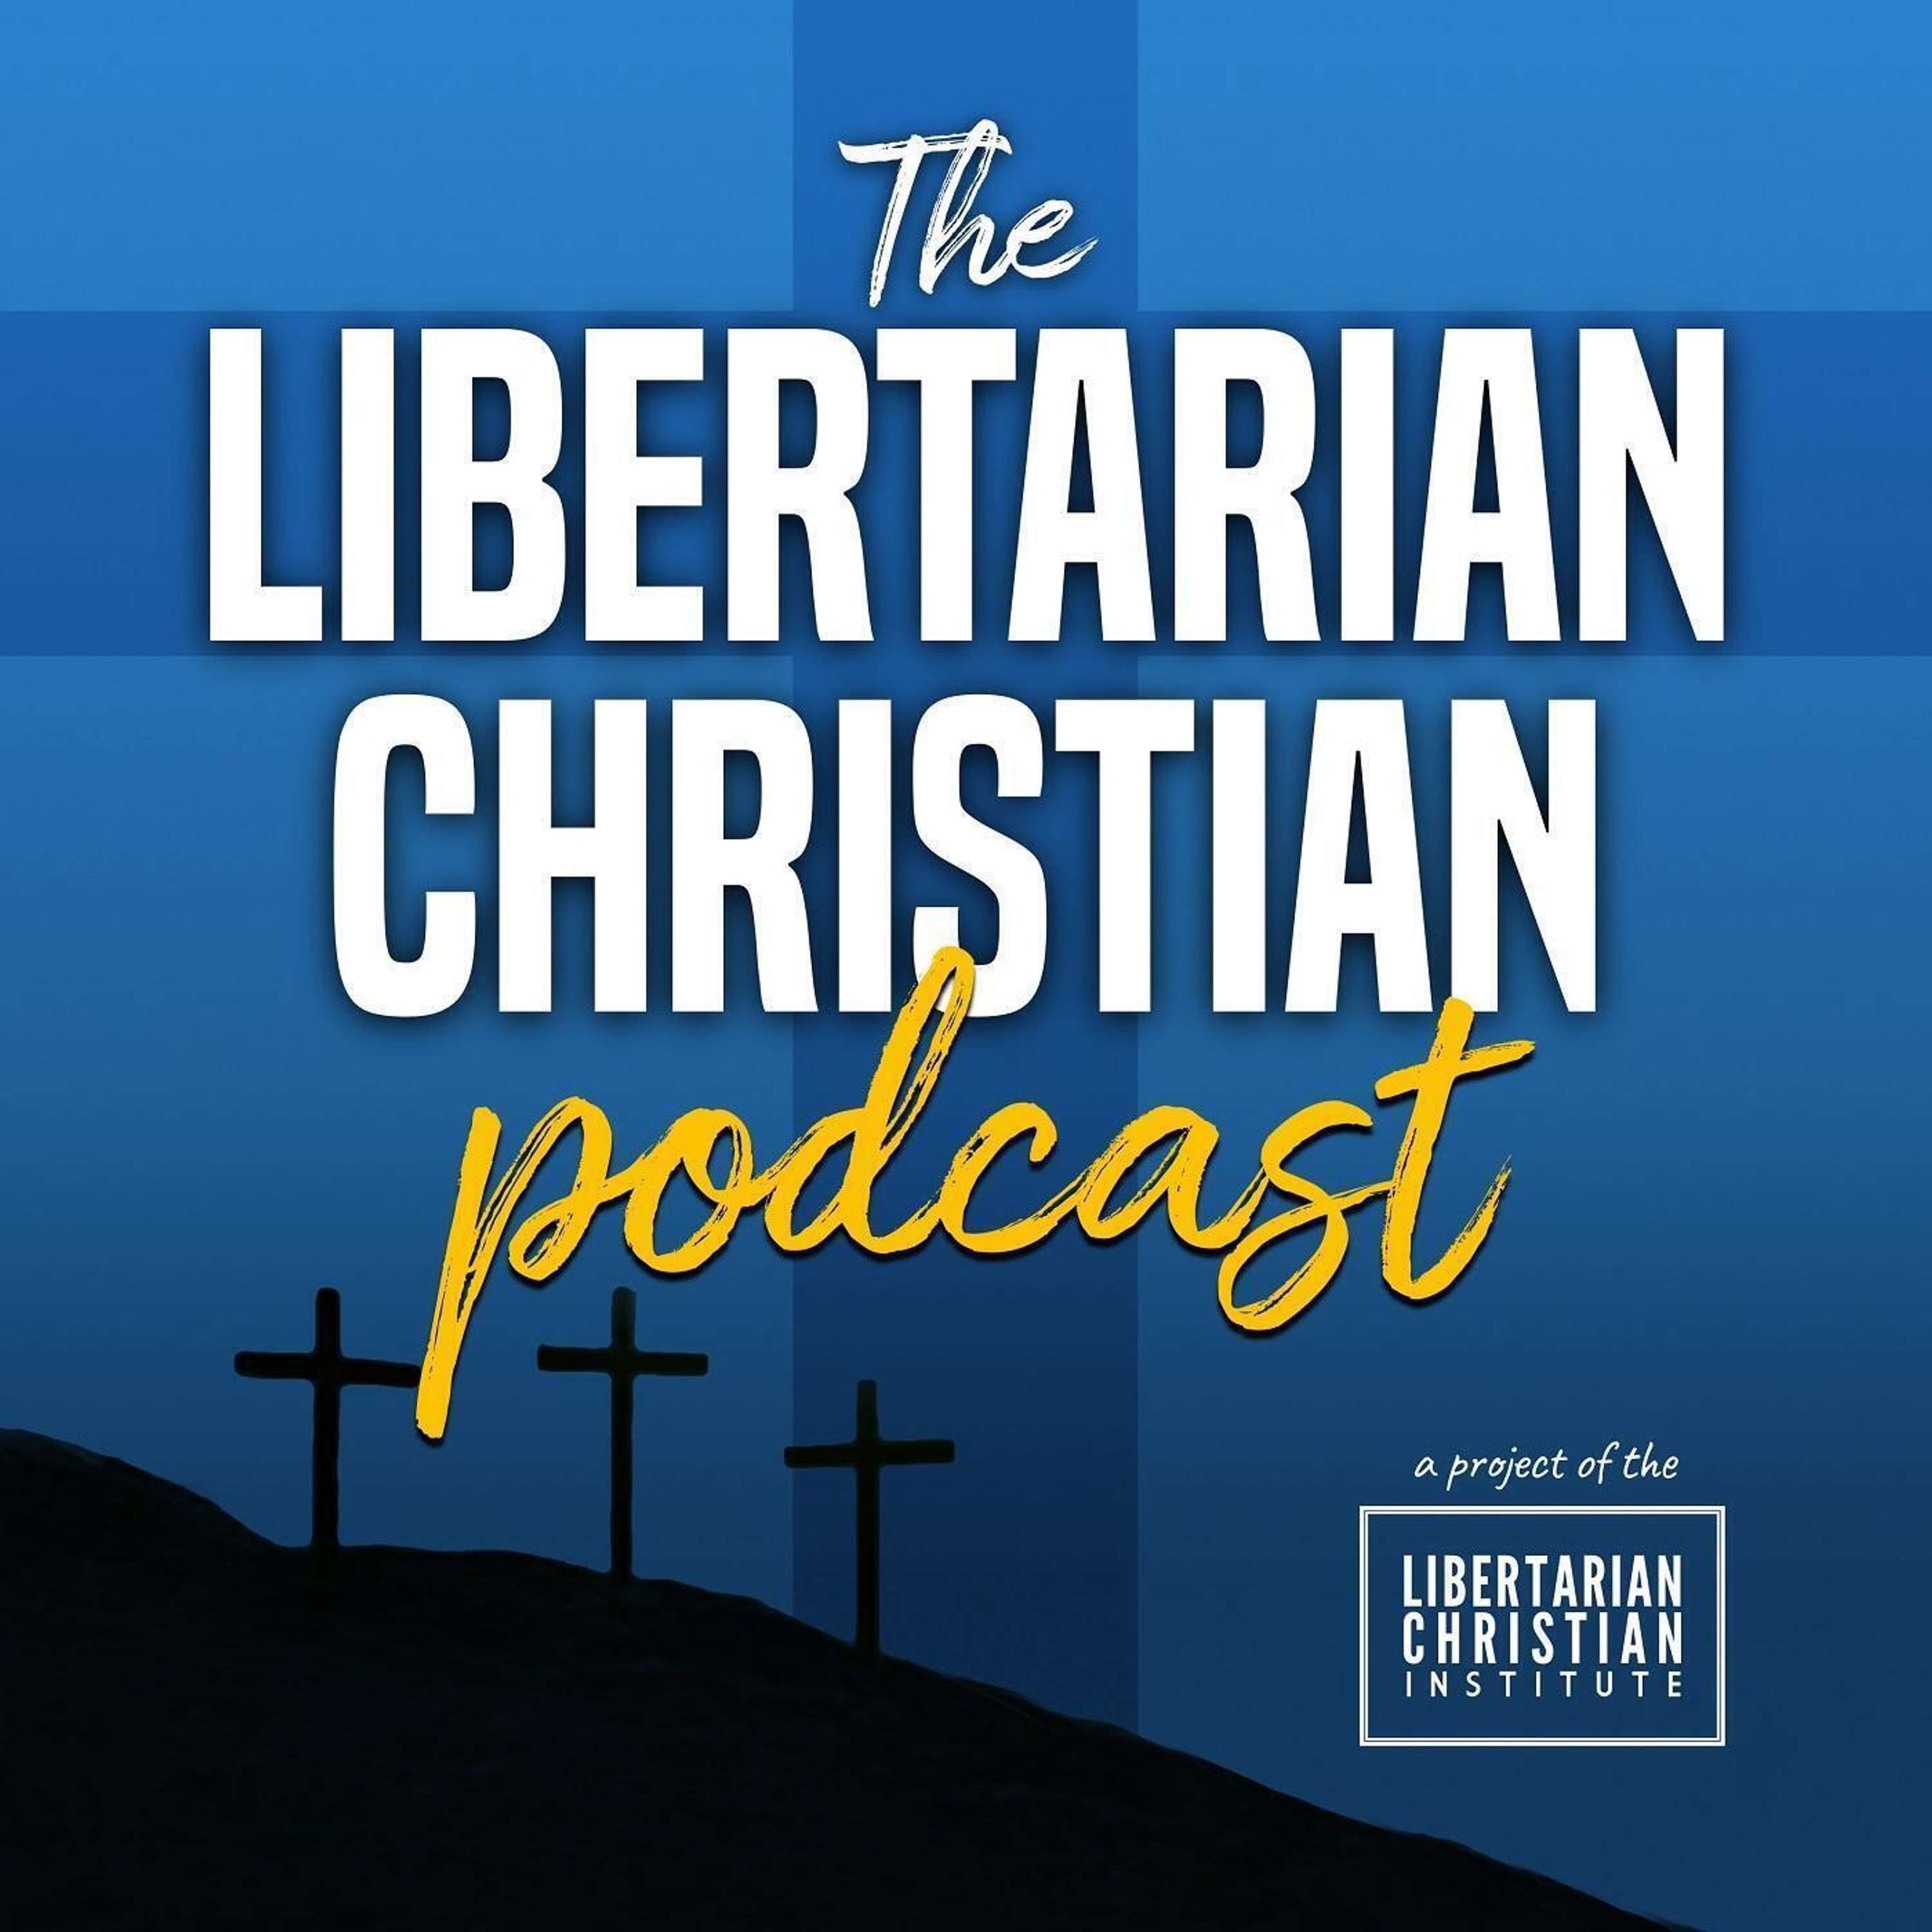 Ep 324: Criminal Justice & Finding Freedom, with John Odermatt